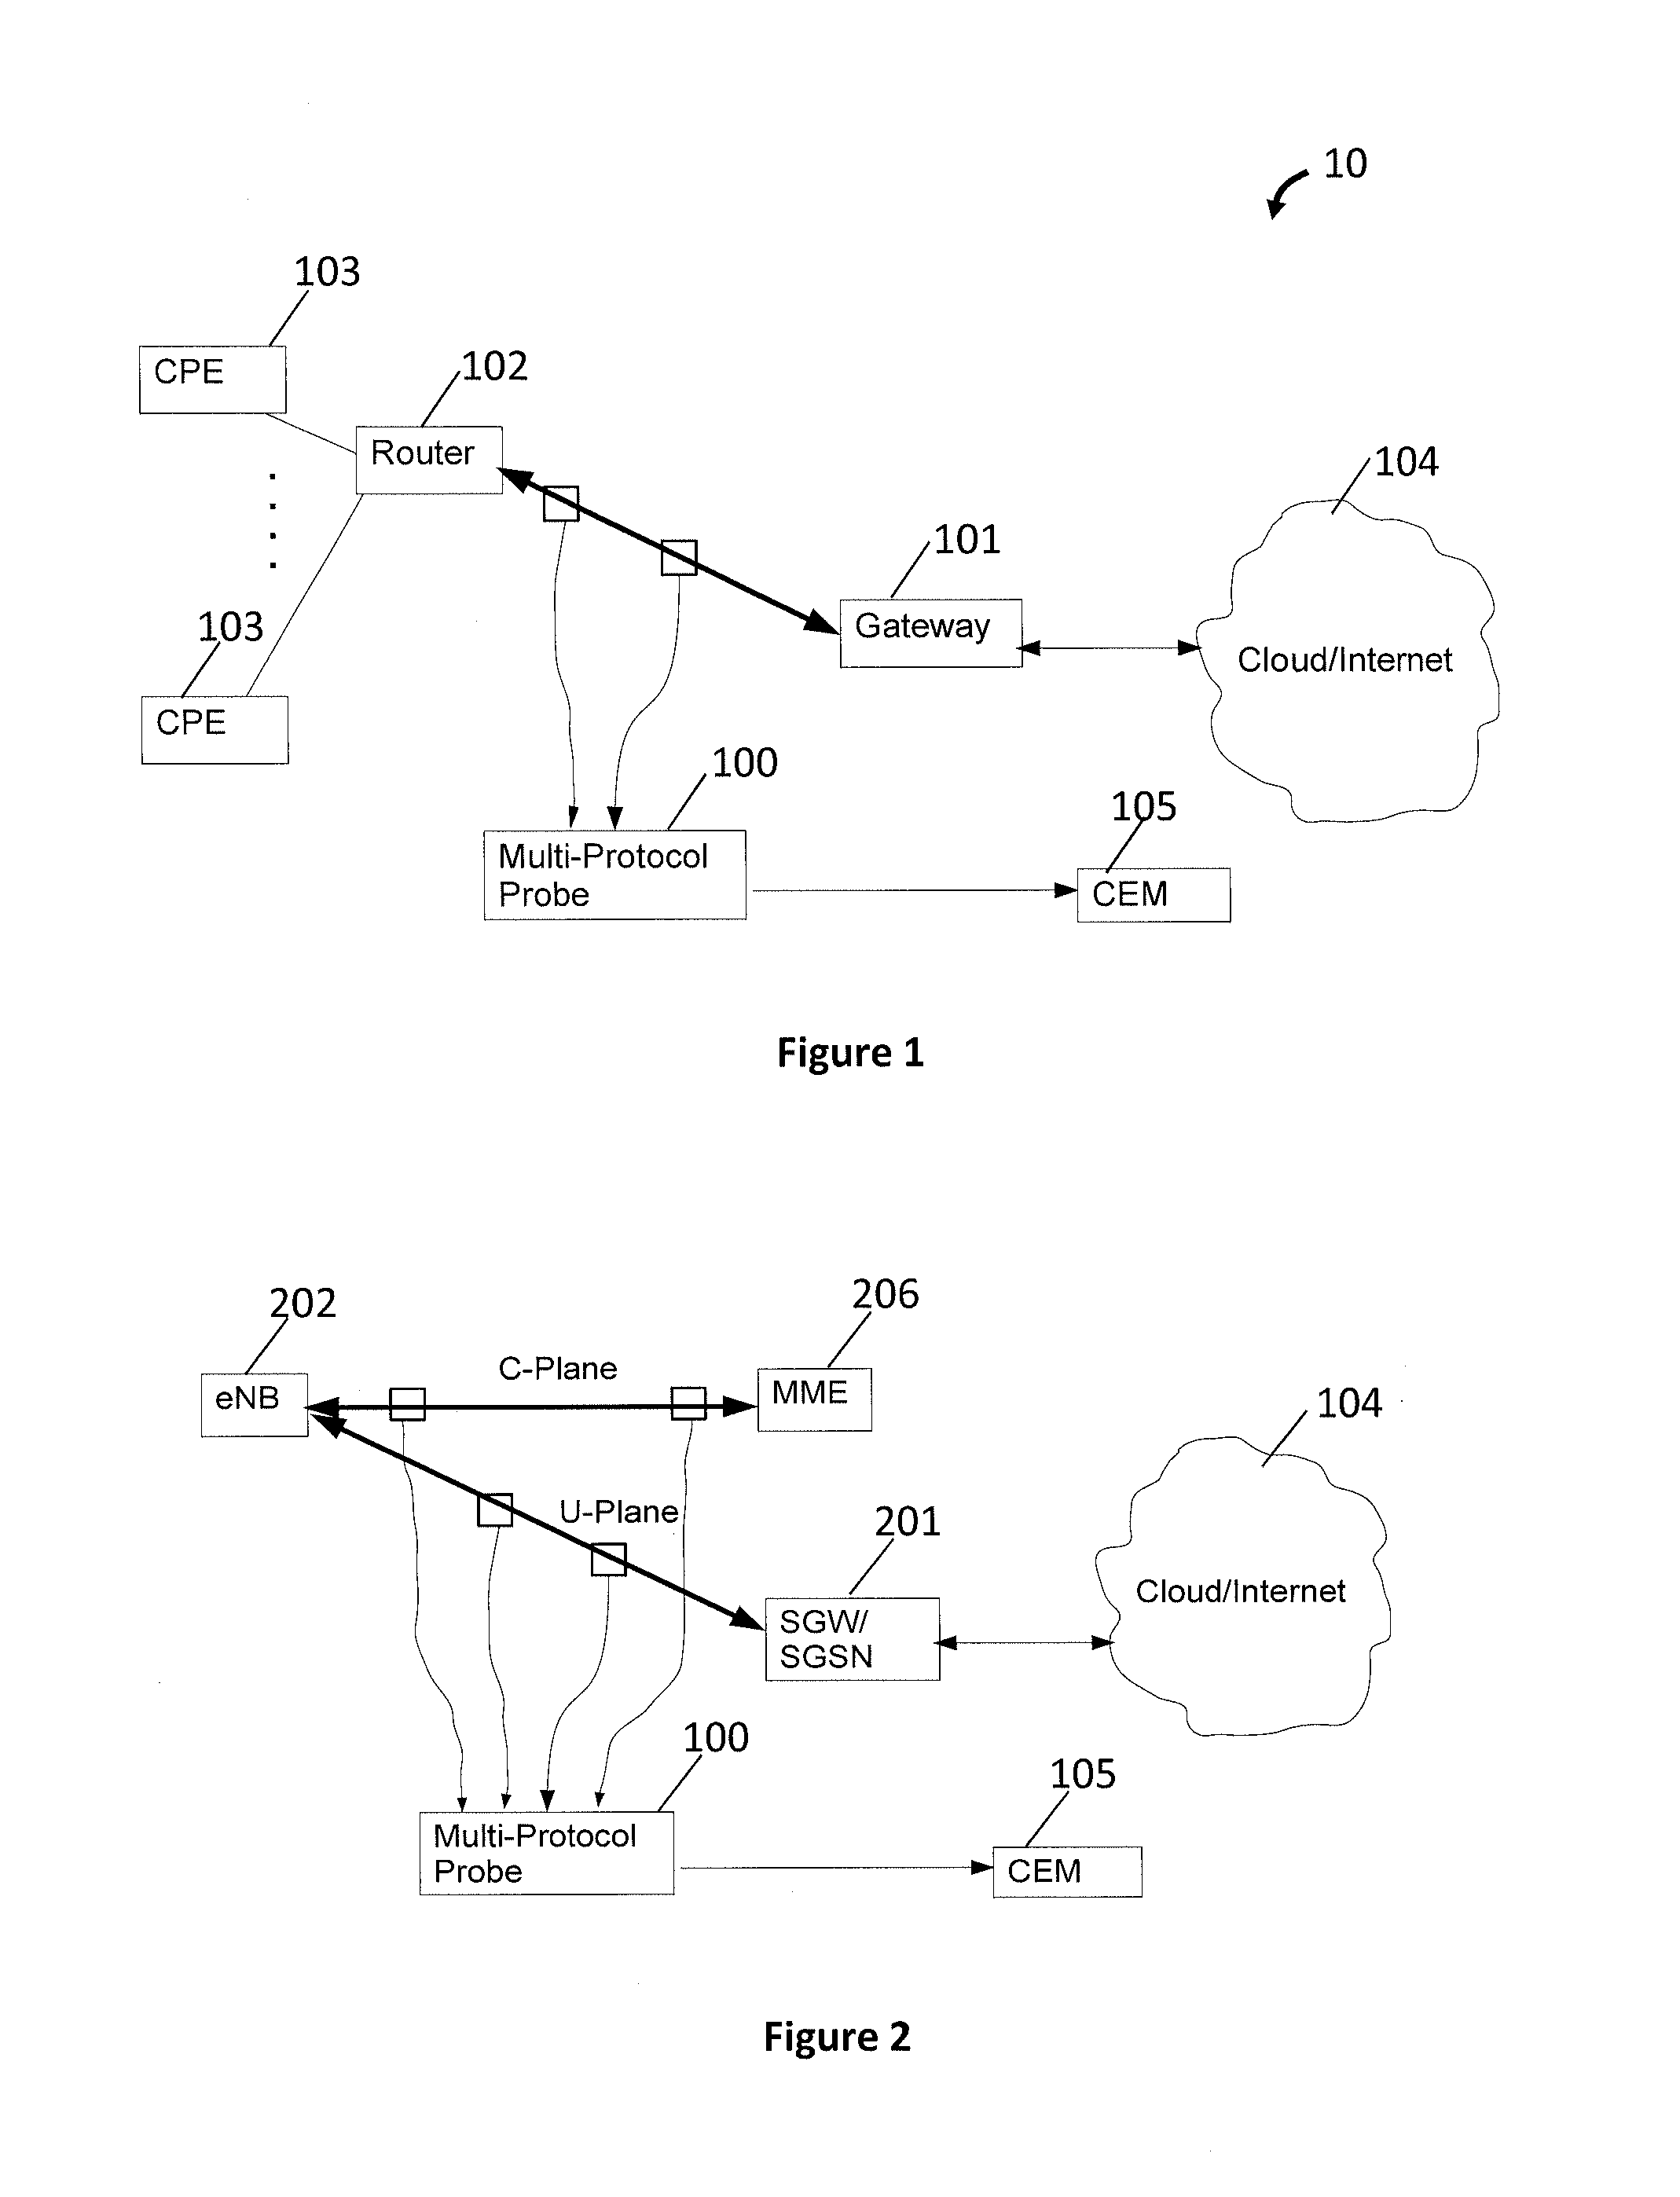 Method For Calculating Statistic Data of Traffic Flows in Data Network And Probe Thereof